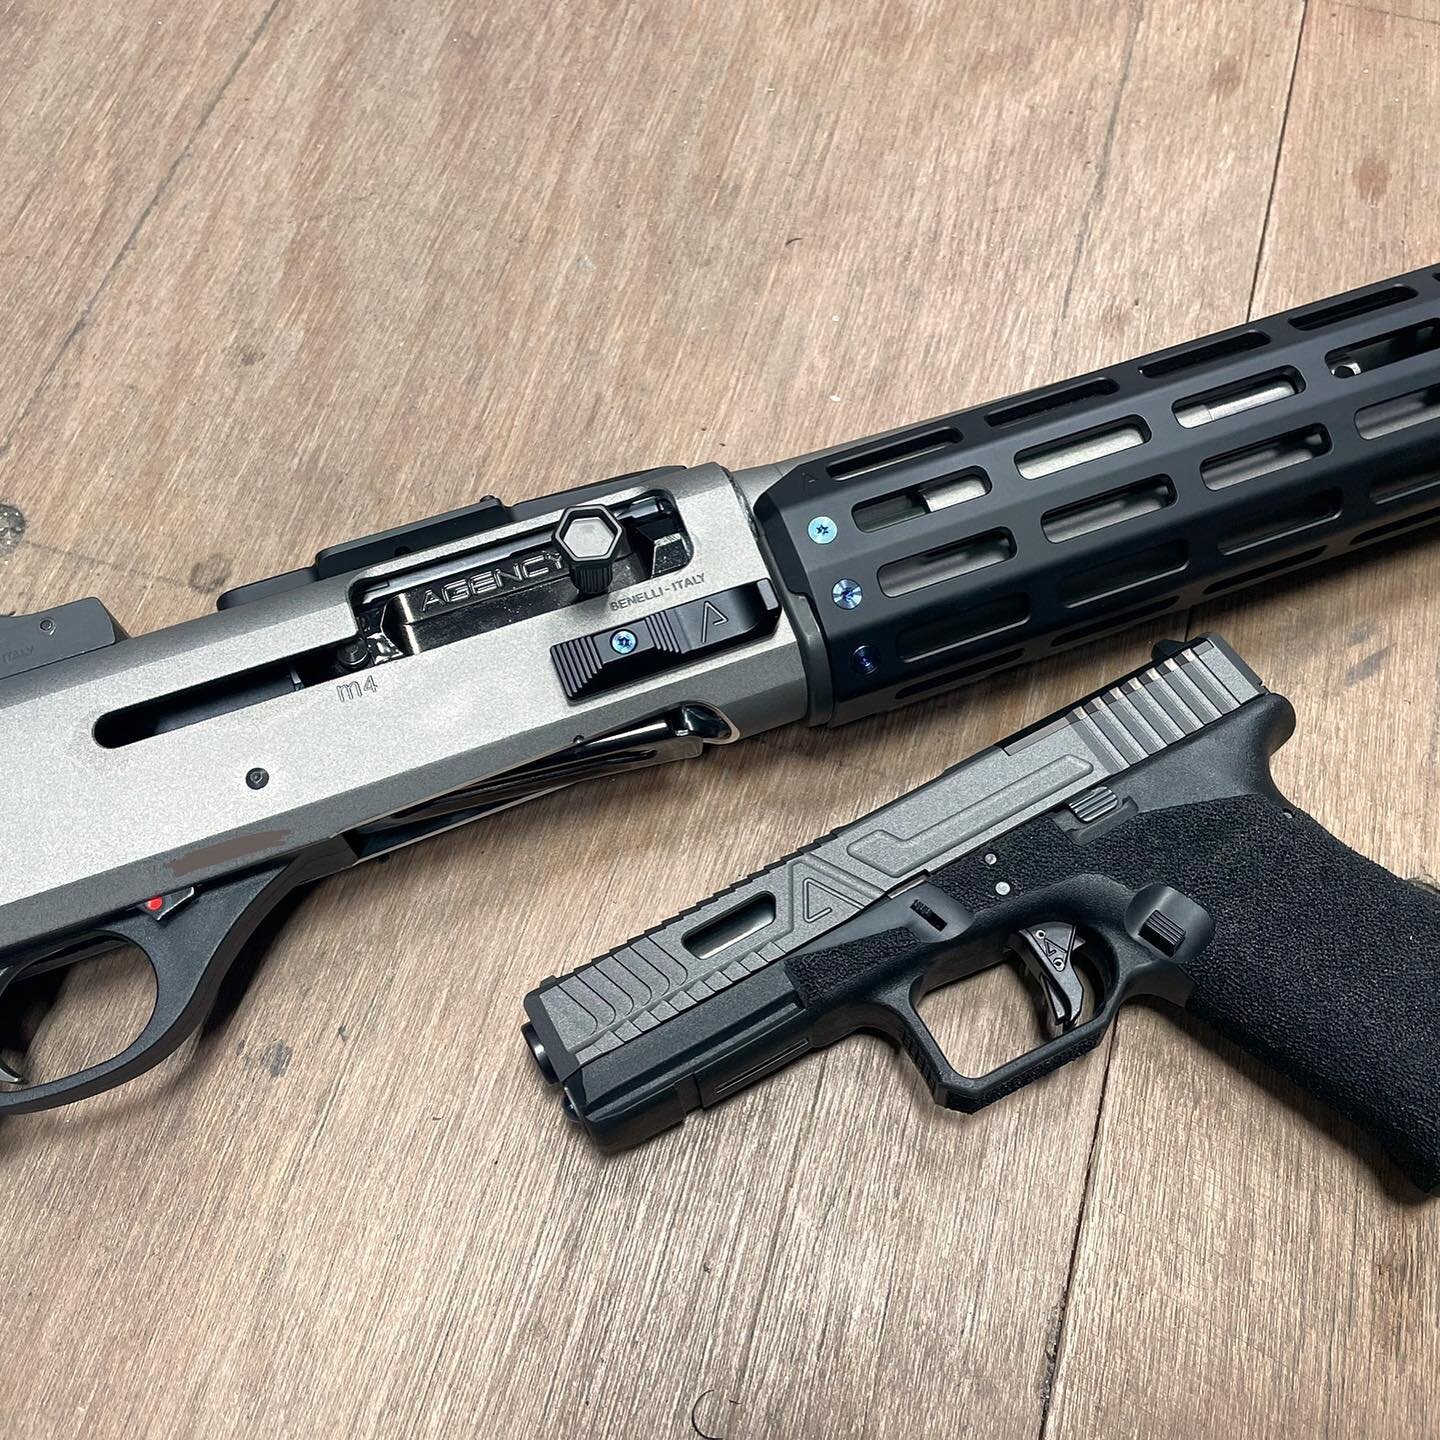 Which combo do you prefer? An M4 with a Bonesaw G17 or an M4 with a Peacekeeper P320? 
#agency #agencyarms #agentsupplied #agencyarmsofficial #agencyarmstrigger #agencylife #agent #syndicate #syndicatebyagency #tradecraft #alltheserrations #p320 #p32